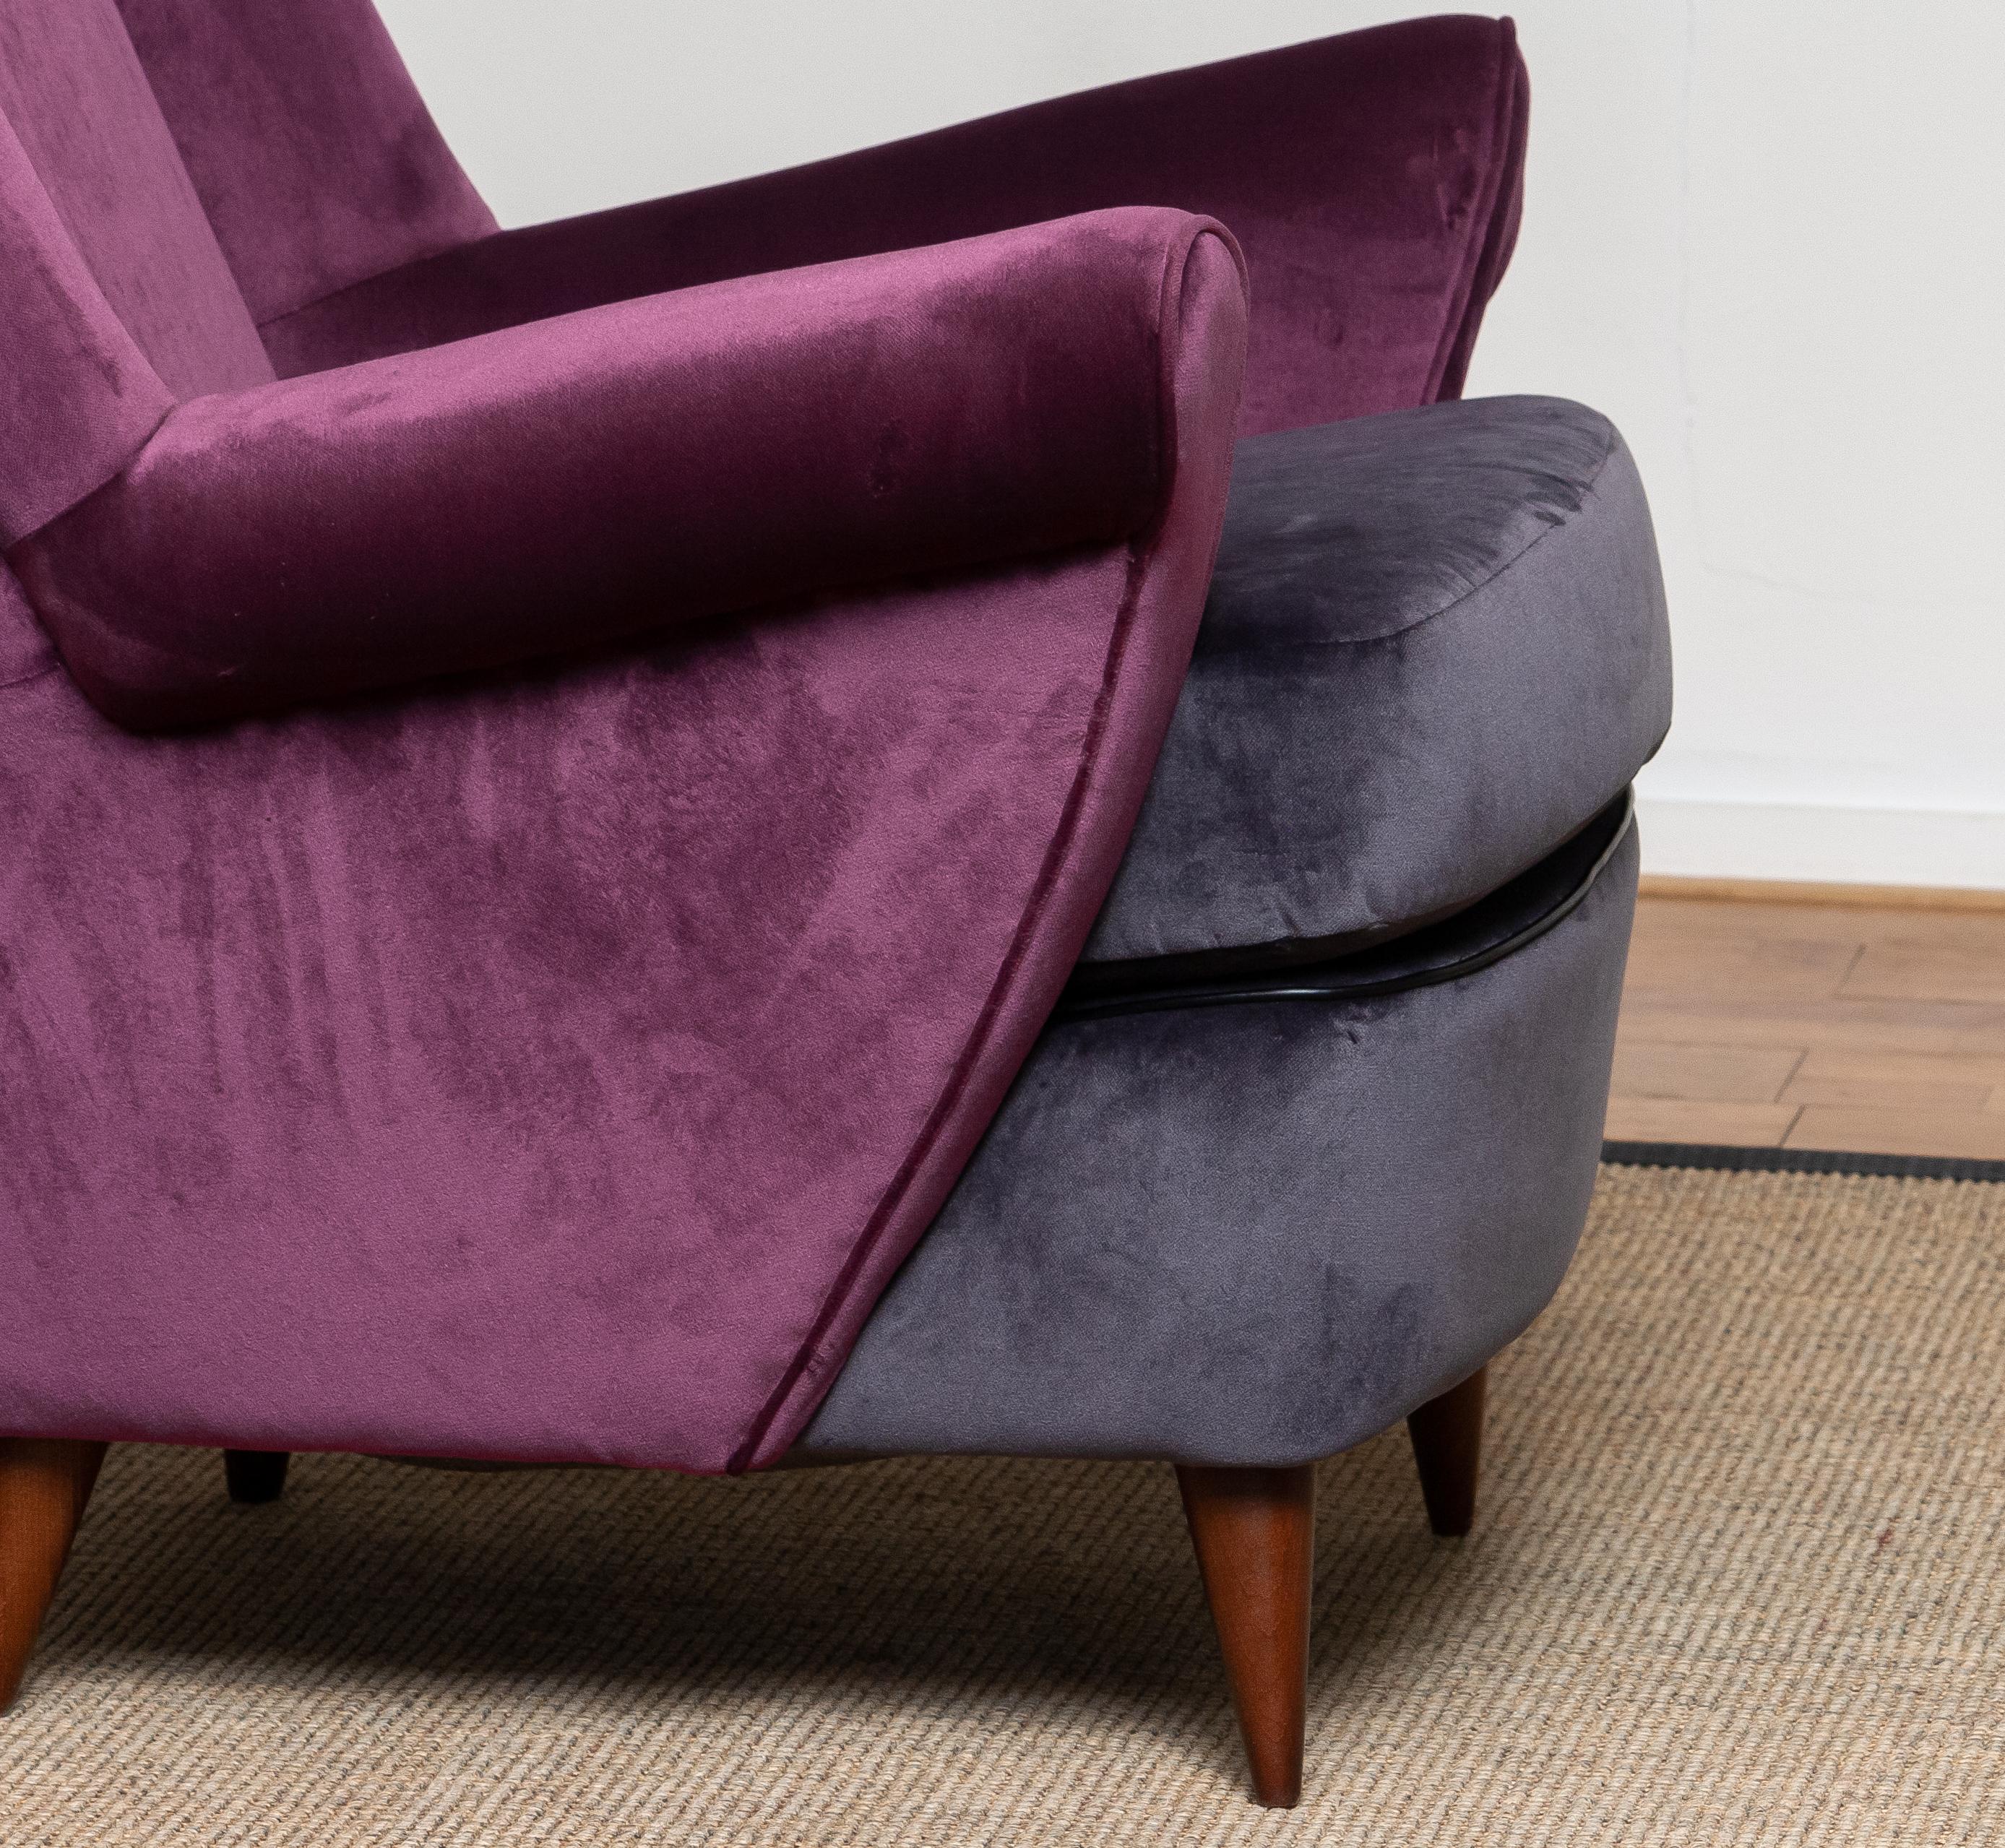 Mid-20th Century 50's Lounge / Easy Chair in Magenta by Designed Gio Ponti for ISA Bergamo, Italy